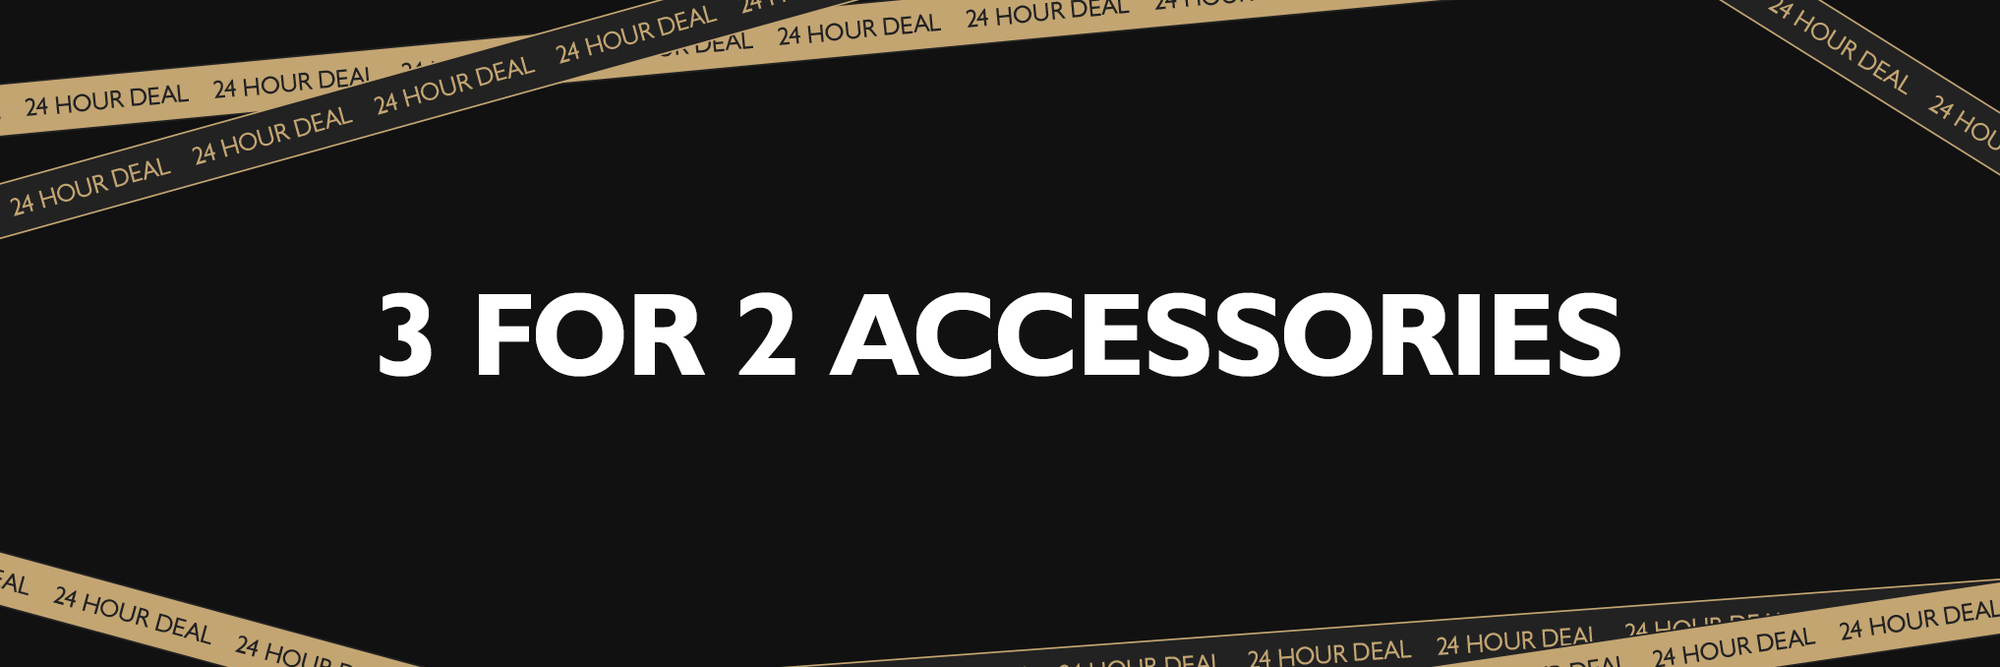 23/24 End of Season Sale - 3 For 2 Accessories